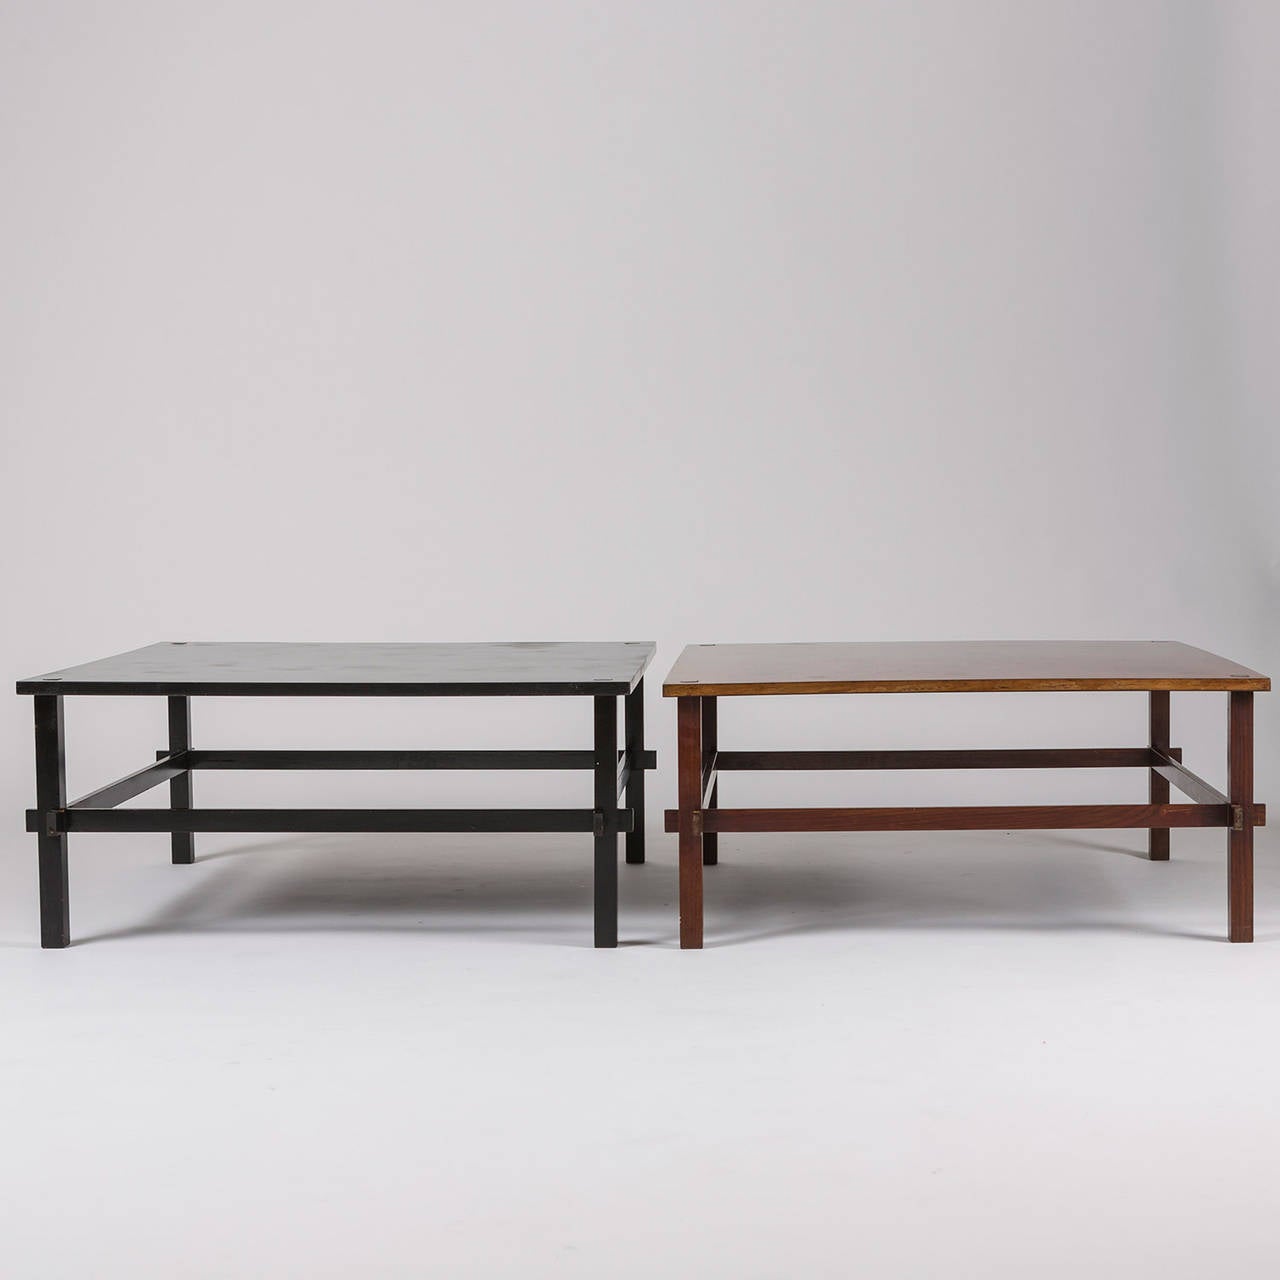 Gorgeous set of two coffee tables model 740 by Gianfranco Frattini for Cassina.
Walnut frame and revolving top, with natural wood and black laminate faces.
Design mentioned for Compasso d'Oro Prize, 1957.